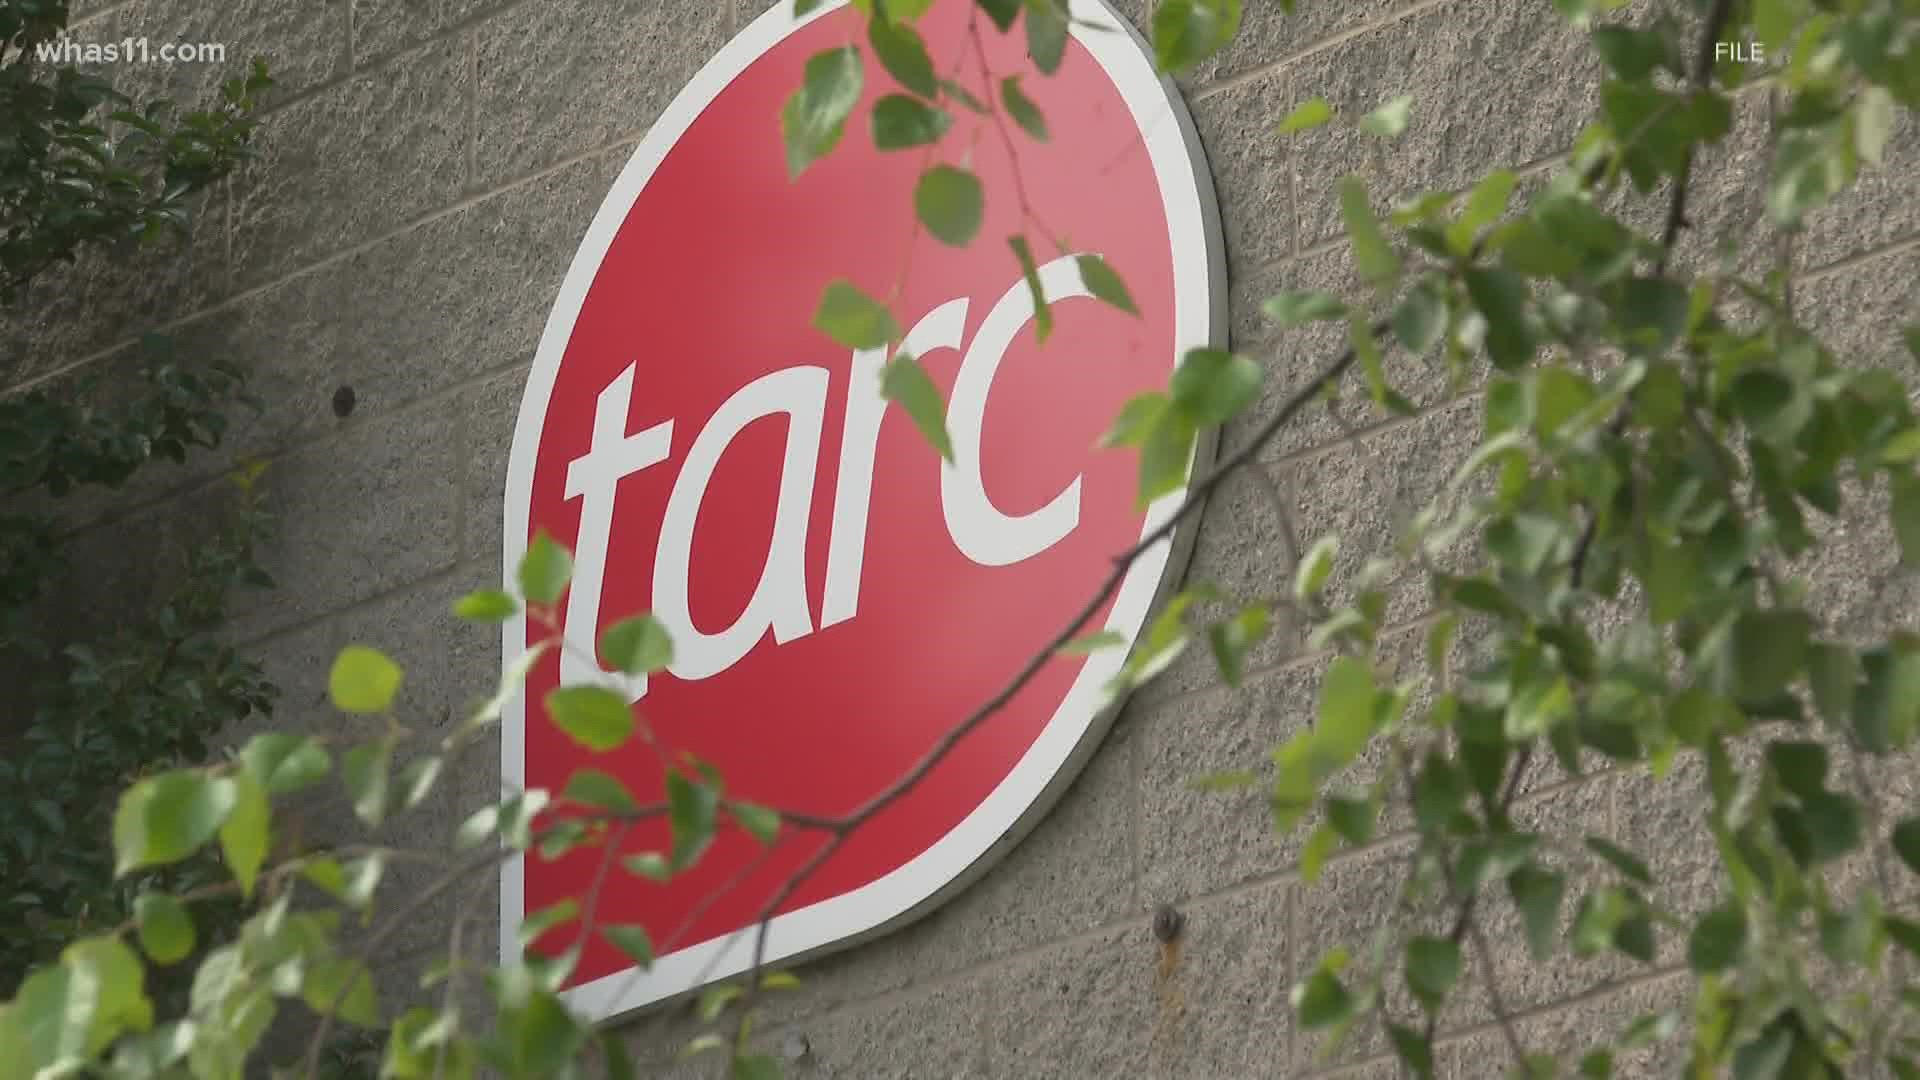 Blue Moon is teaming up with TARC to make all bus rides free from 4 a.m. on Friday until the end of service on Derby day.